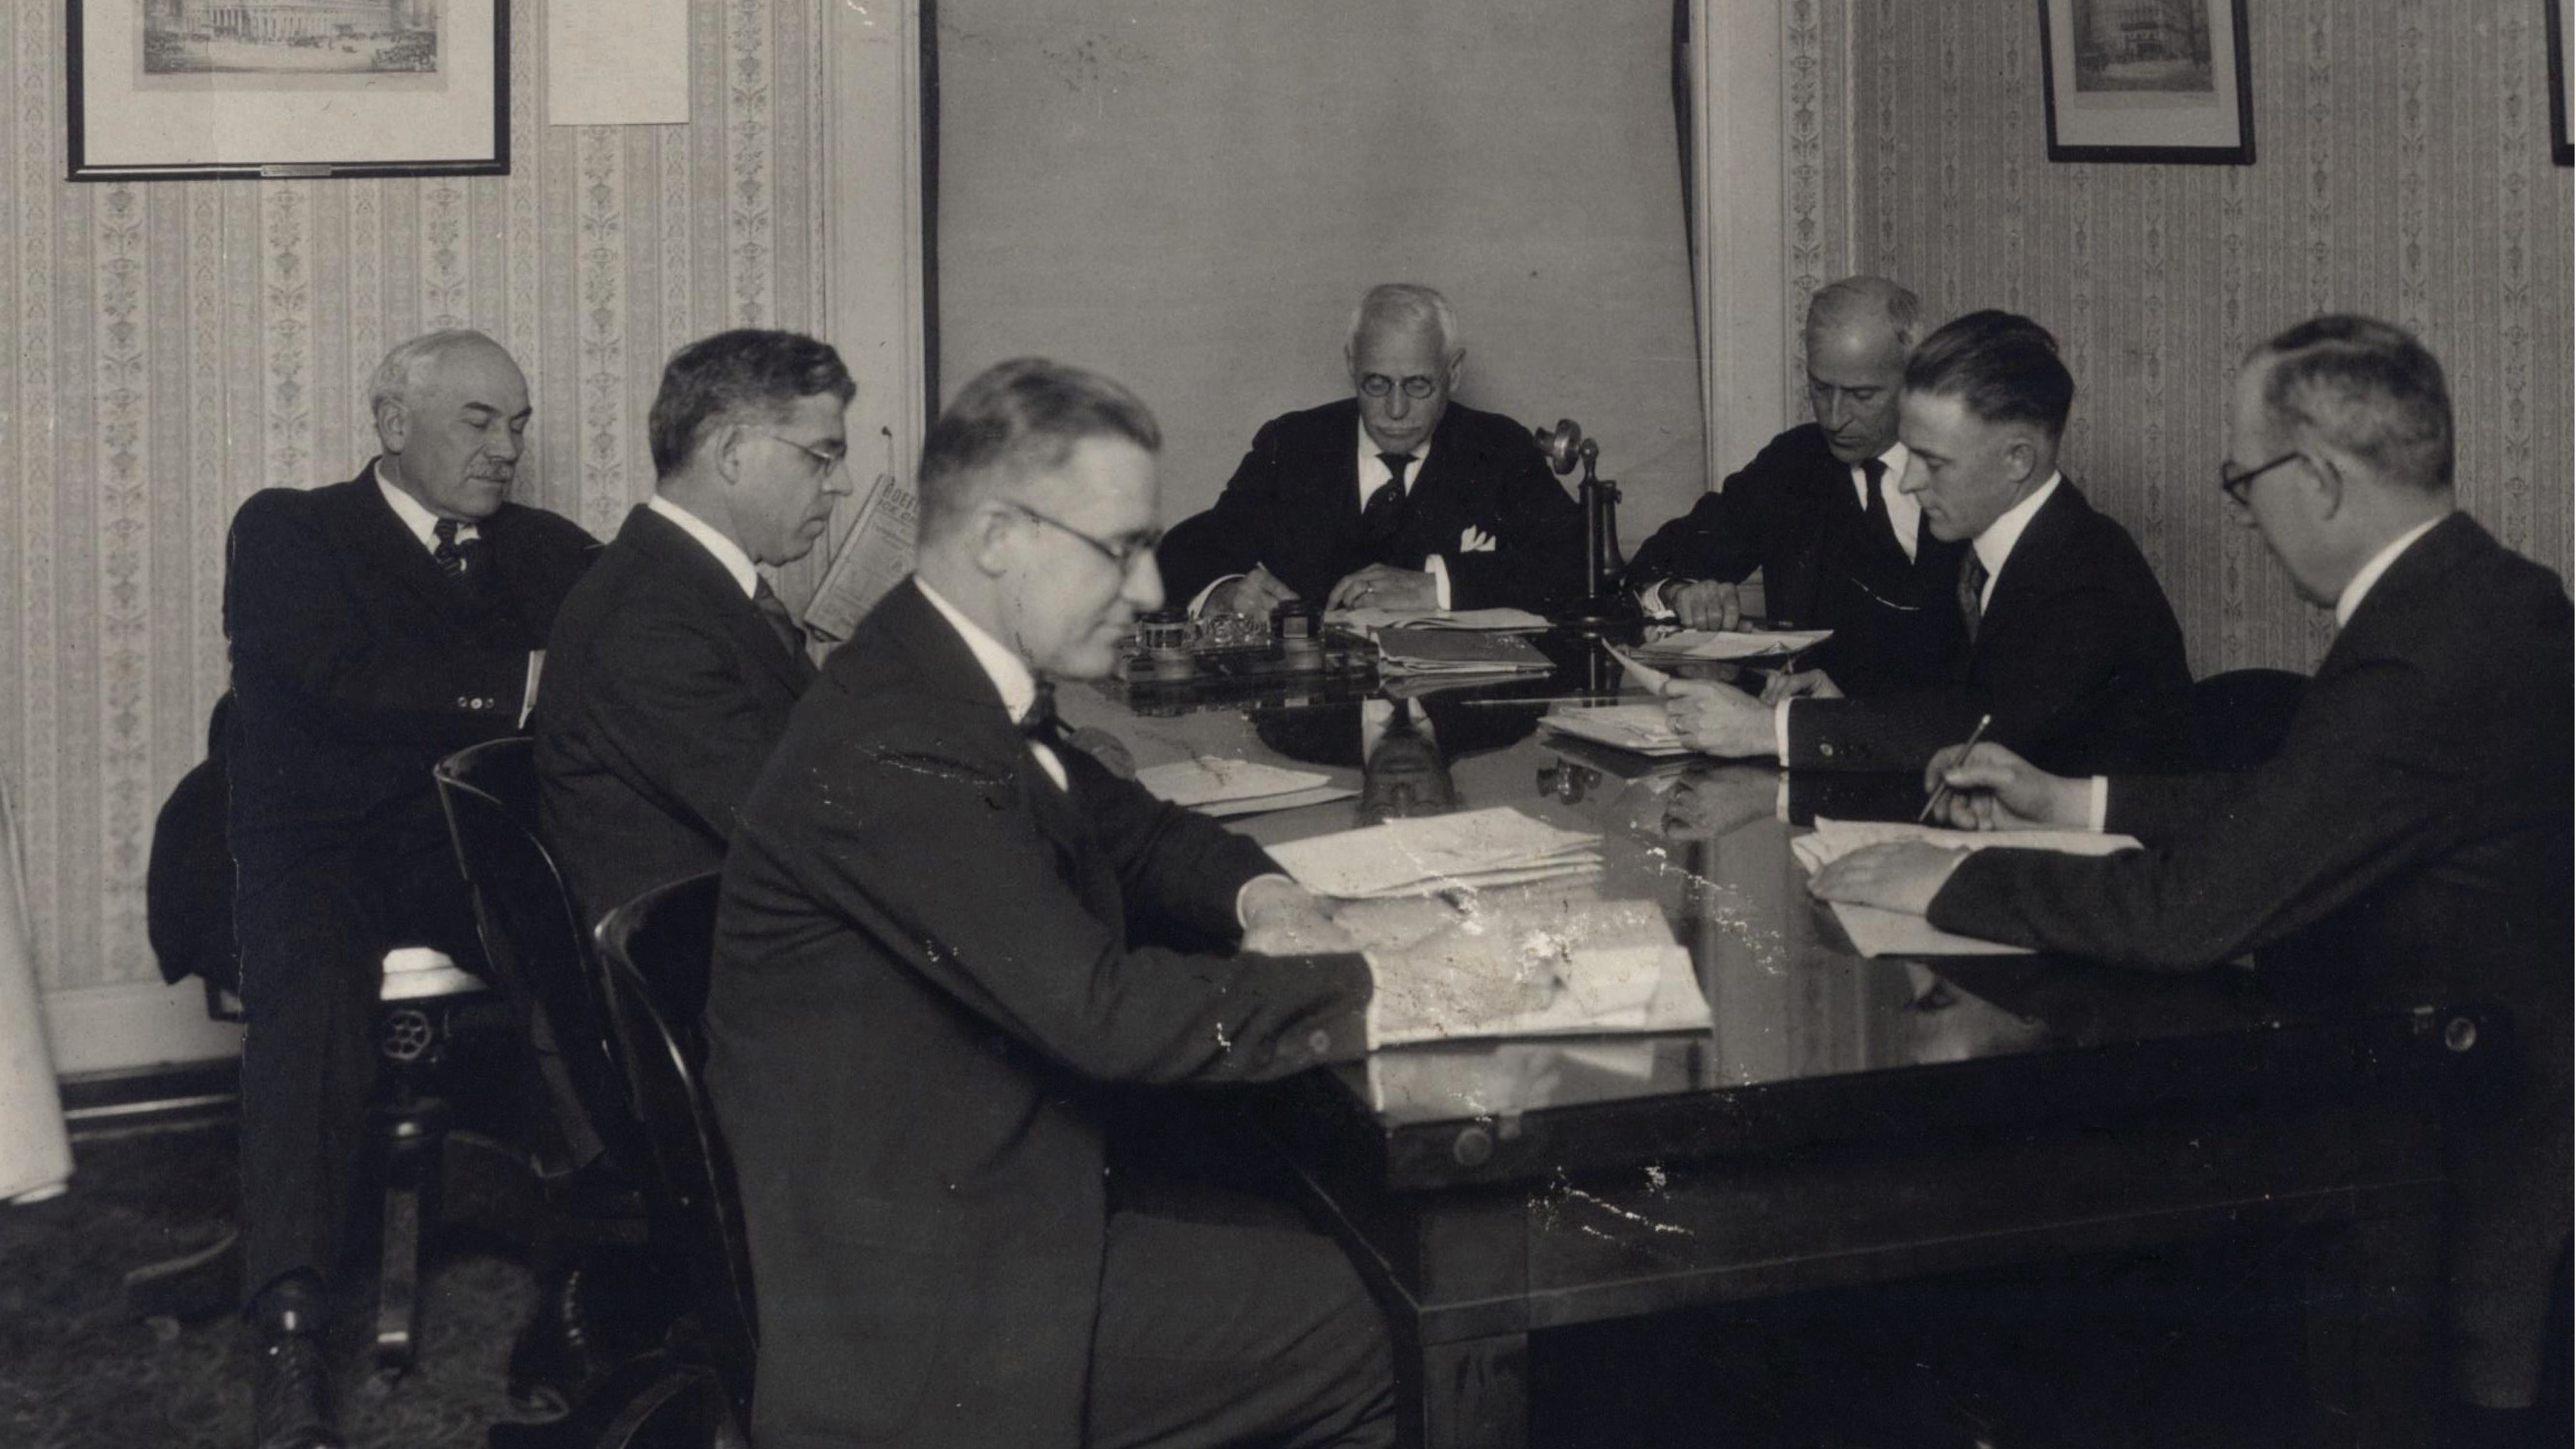 Men in business suits sit at a conference table.